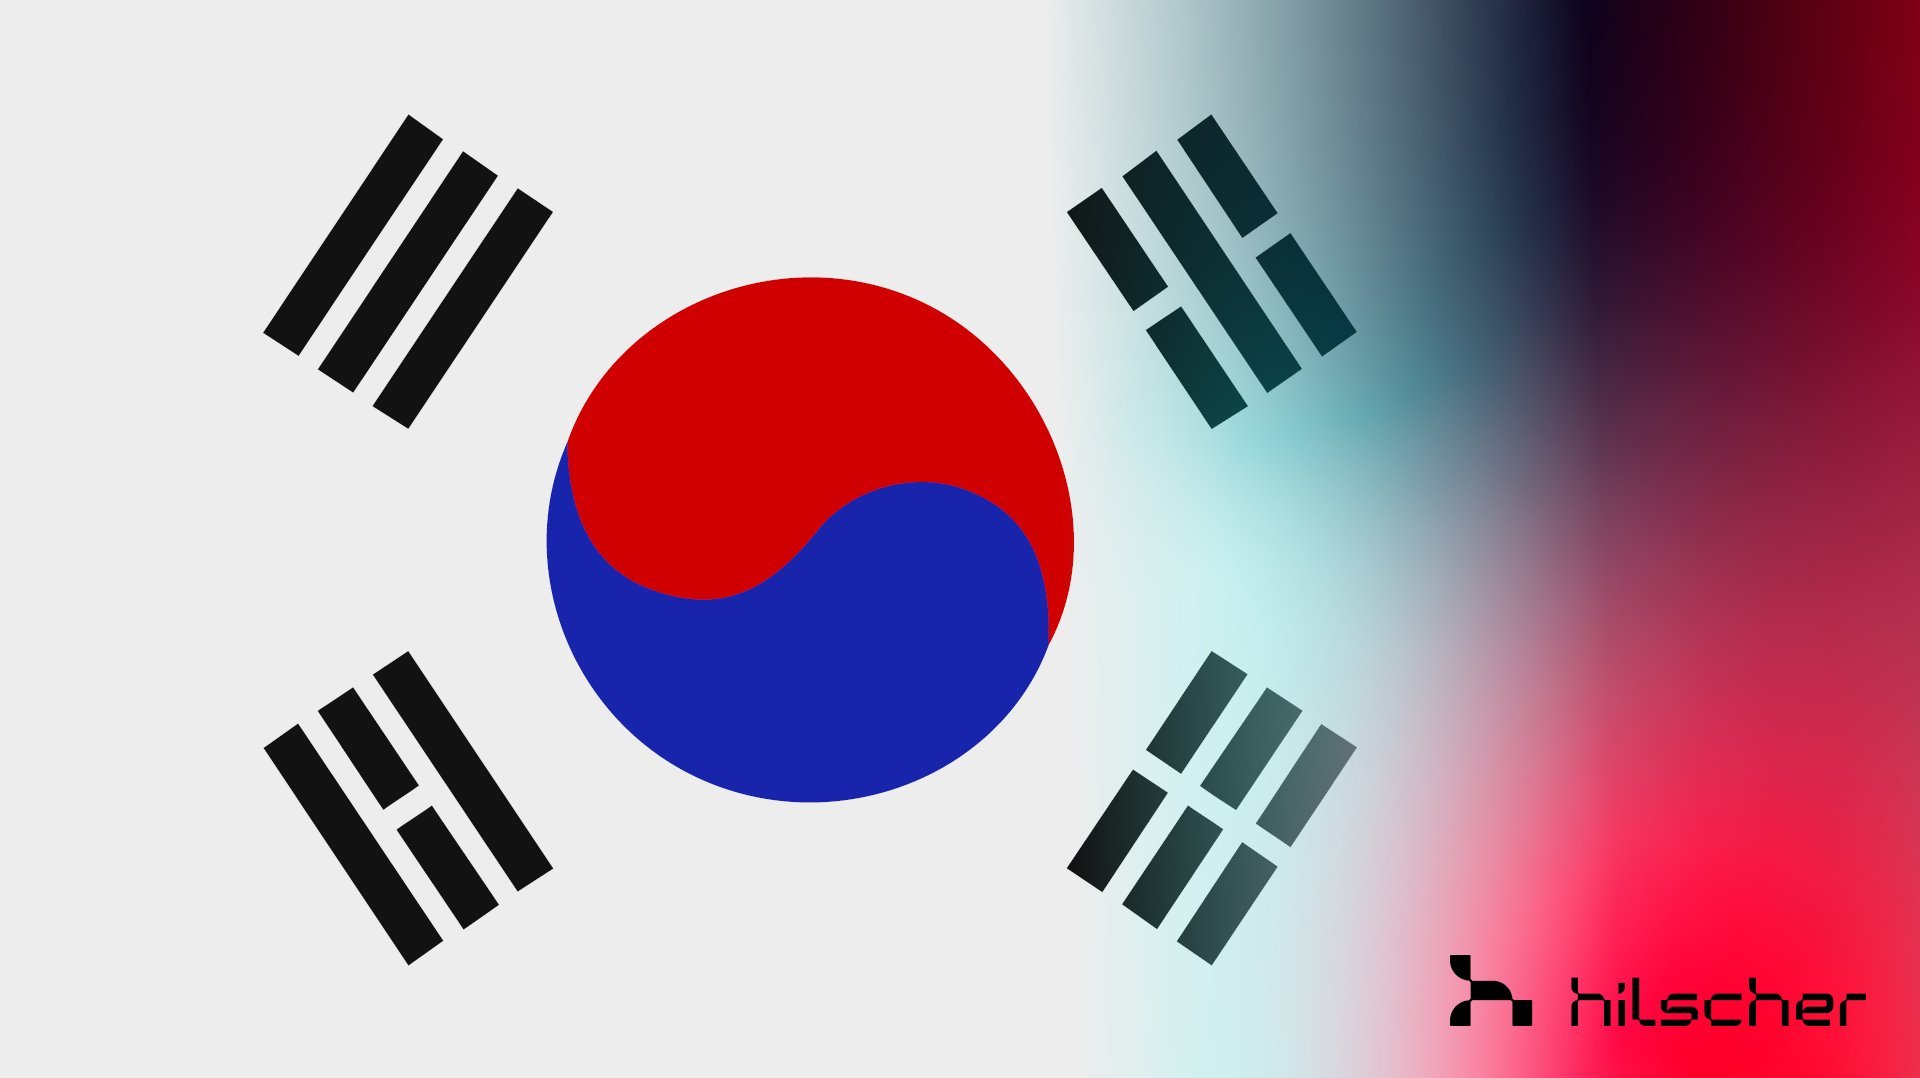 The flag of South Korea. On the right side of the picture is a fade to a colorful space, accounting for nearly a quarter of the image.